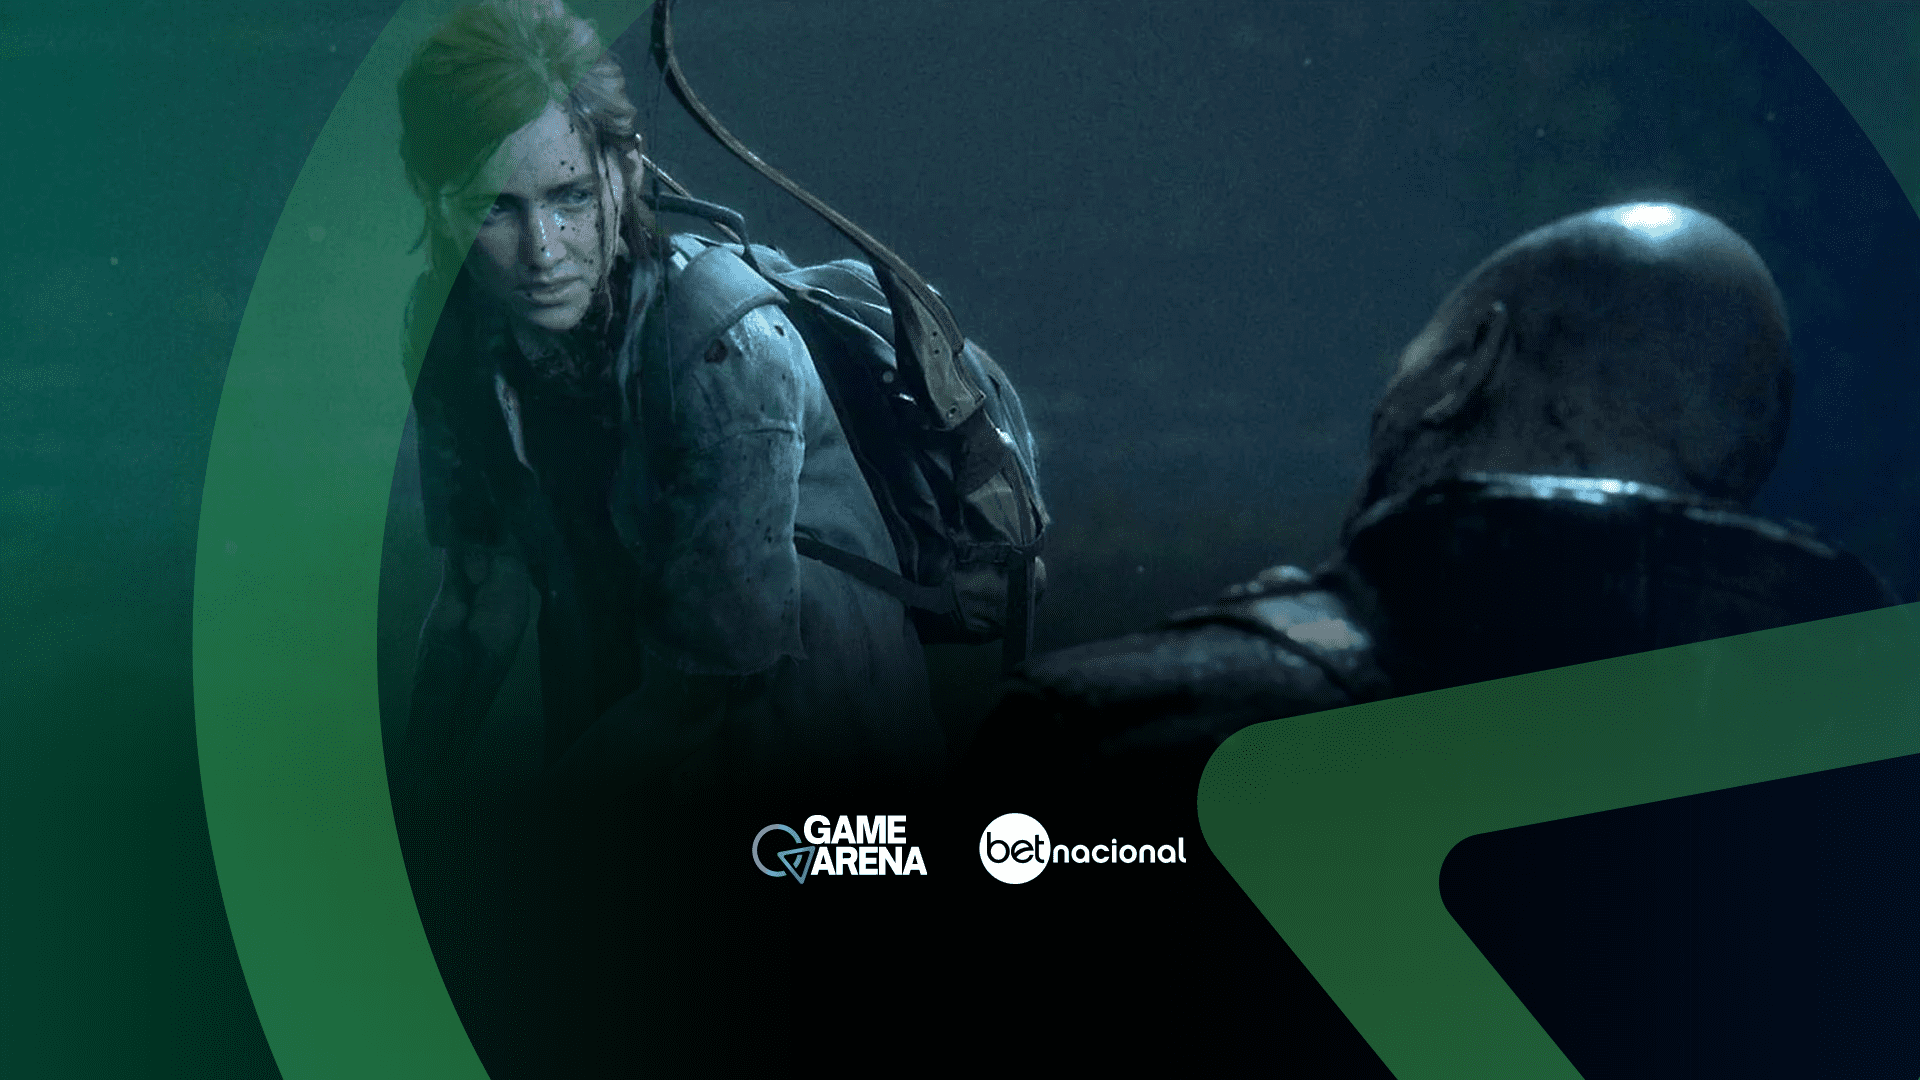 1920x1080 the last of us part 2 best hd wallpaper desktop  The last of us,  Last of us remastered, Destiny the collection